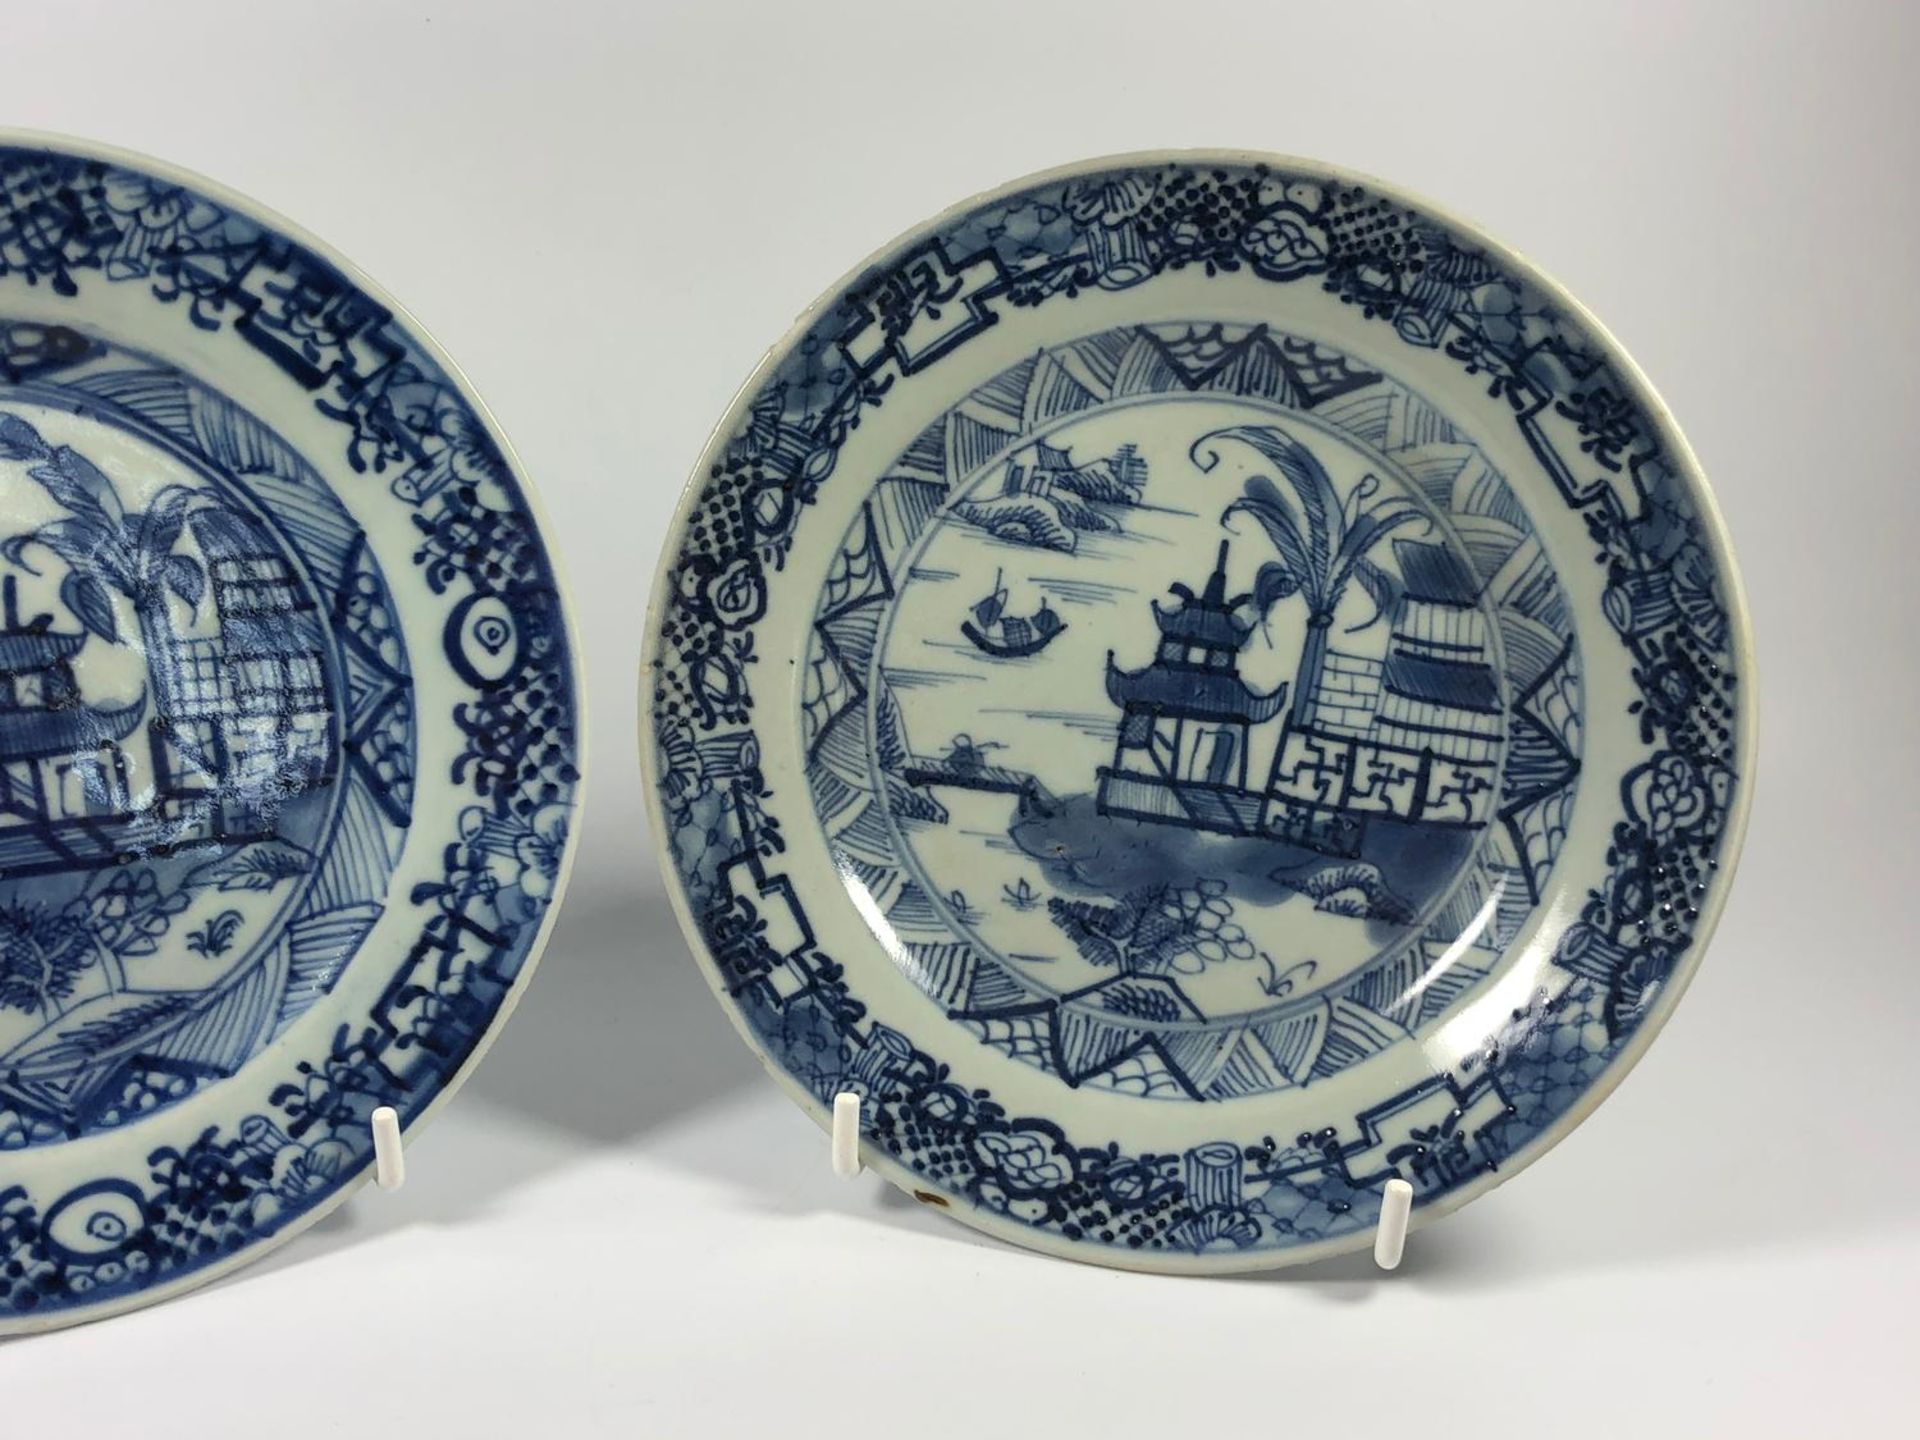 A PAIR OF 19TH CENTURY CHINESE BLUE AND WHITE DISHES / SIDE PLATES, DIAMETER 16.5CM - Image 5 of 9